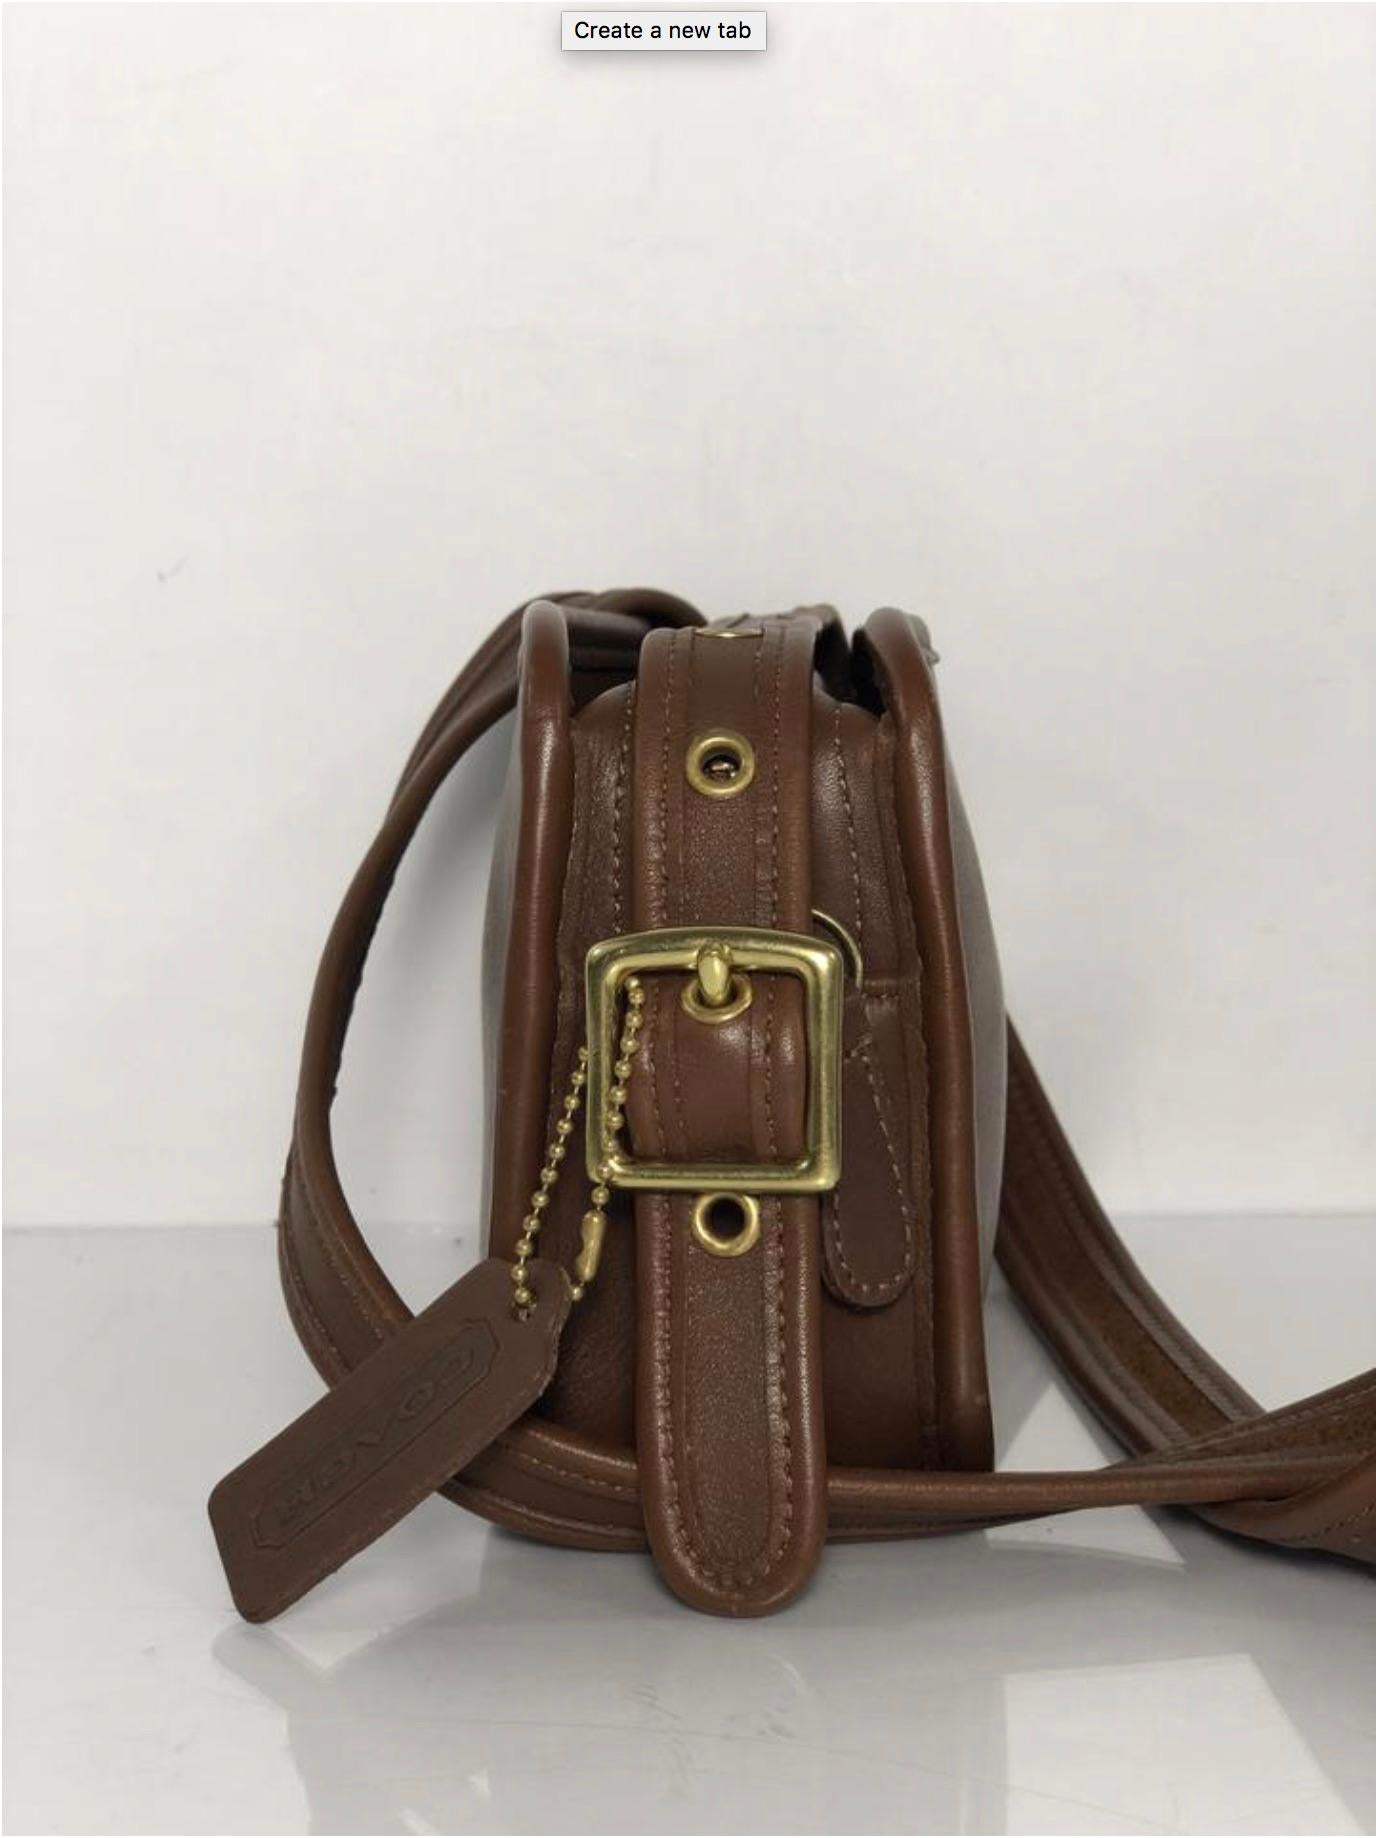 Coach Vintage Small Zipper Crossbody Shoulder Handbag in Brown In Excellent Condition For Sale In Saint Charles, IL